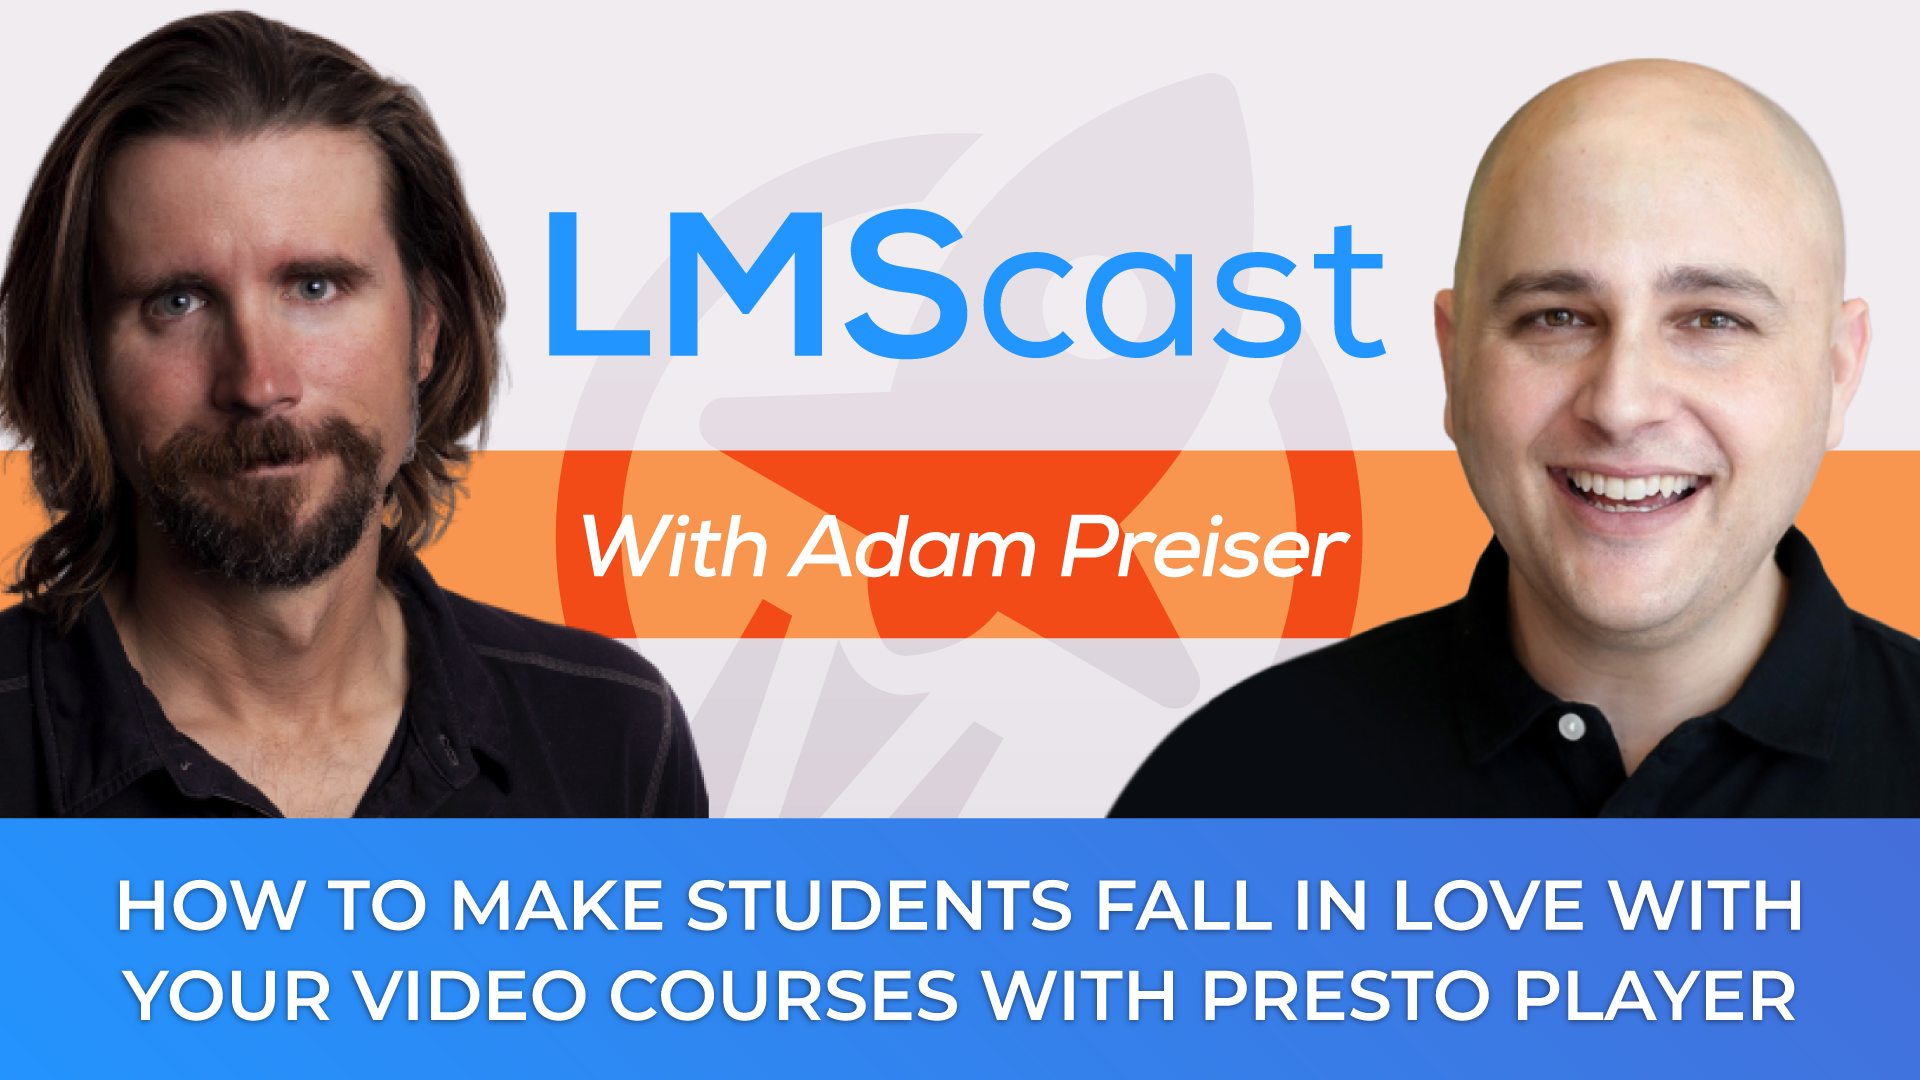 How to make students fall in love with your video courses with Presto player